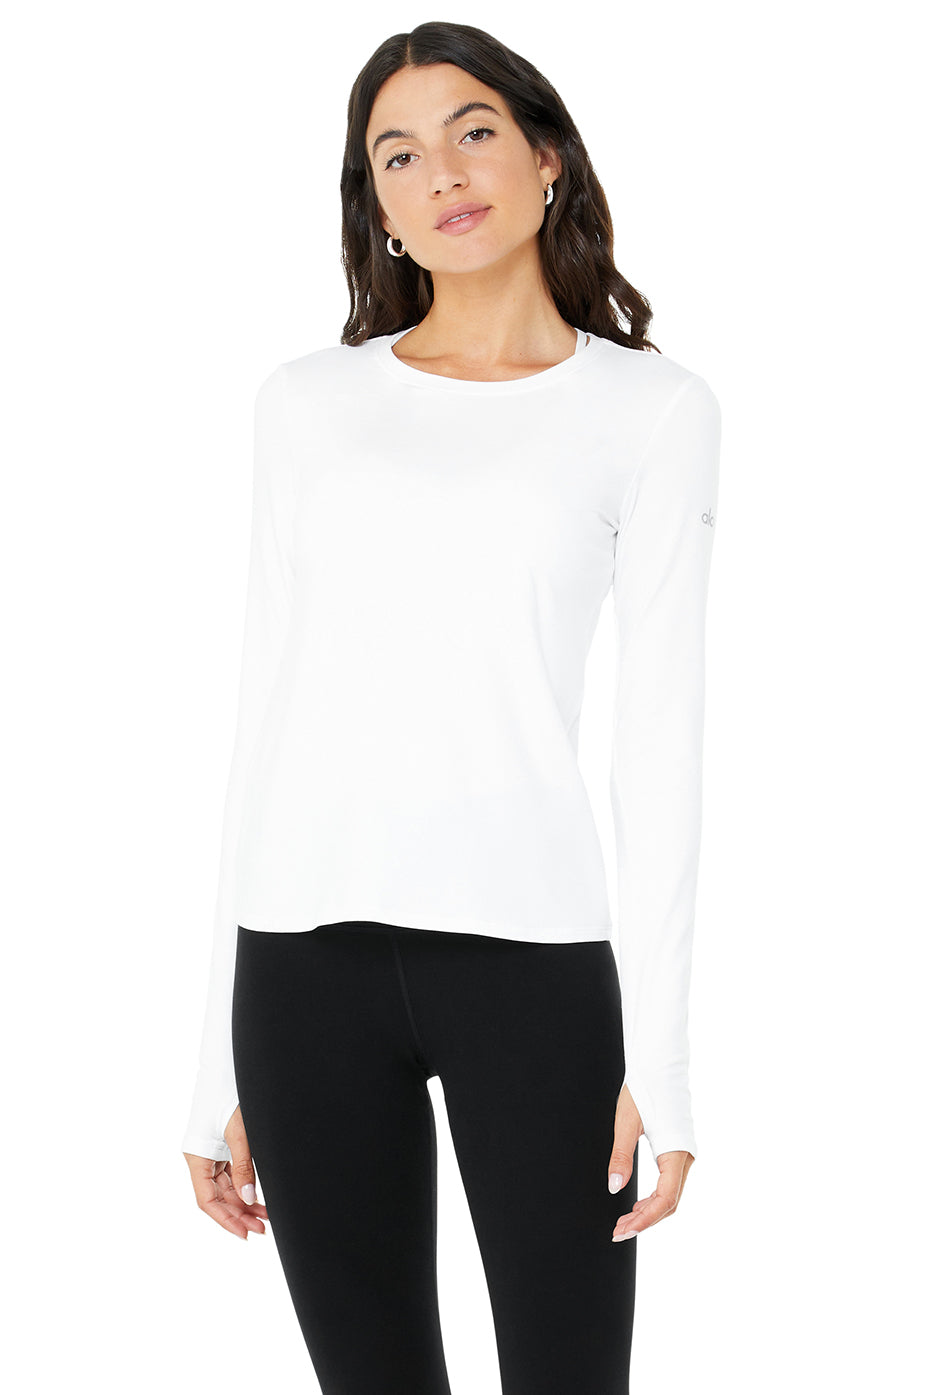 alo Alosoft Form Long Sleeve Top in White